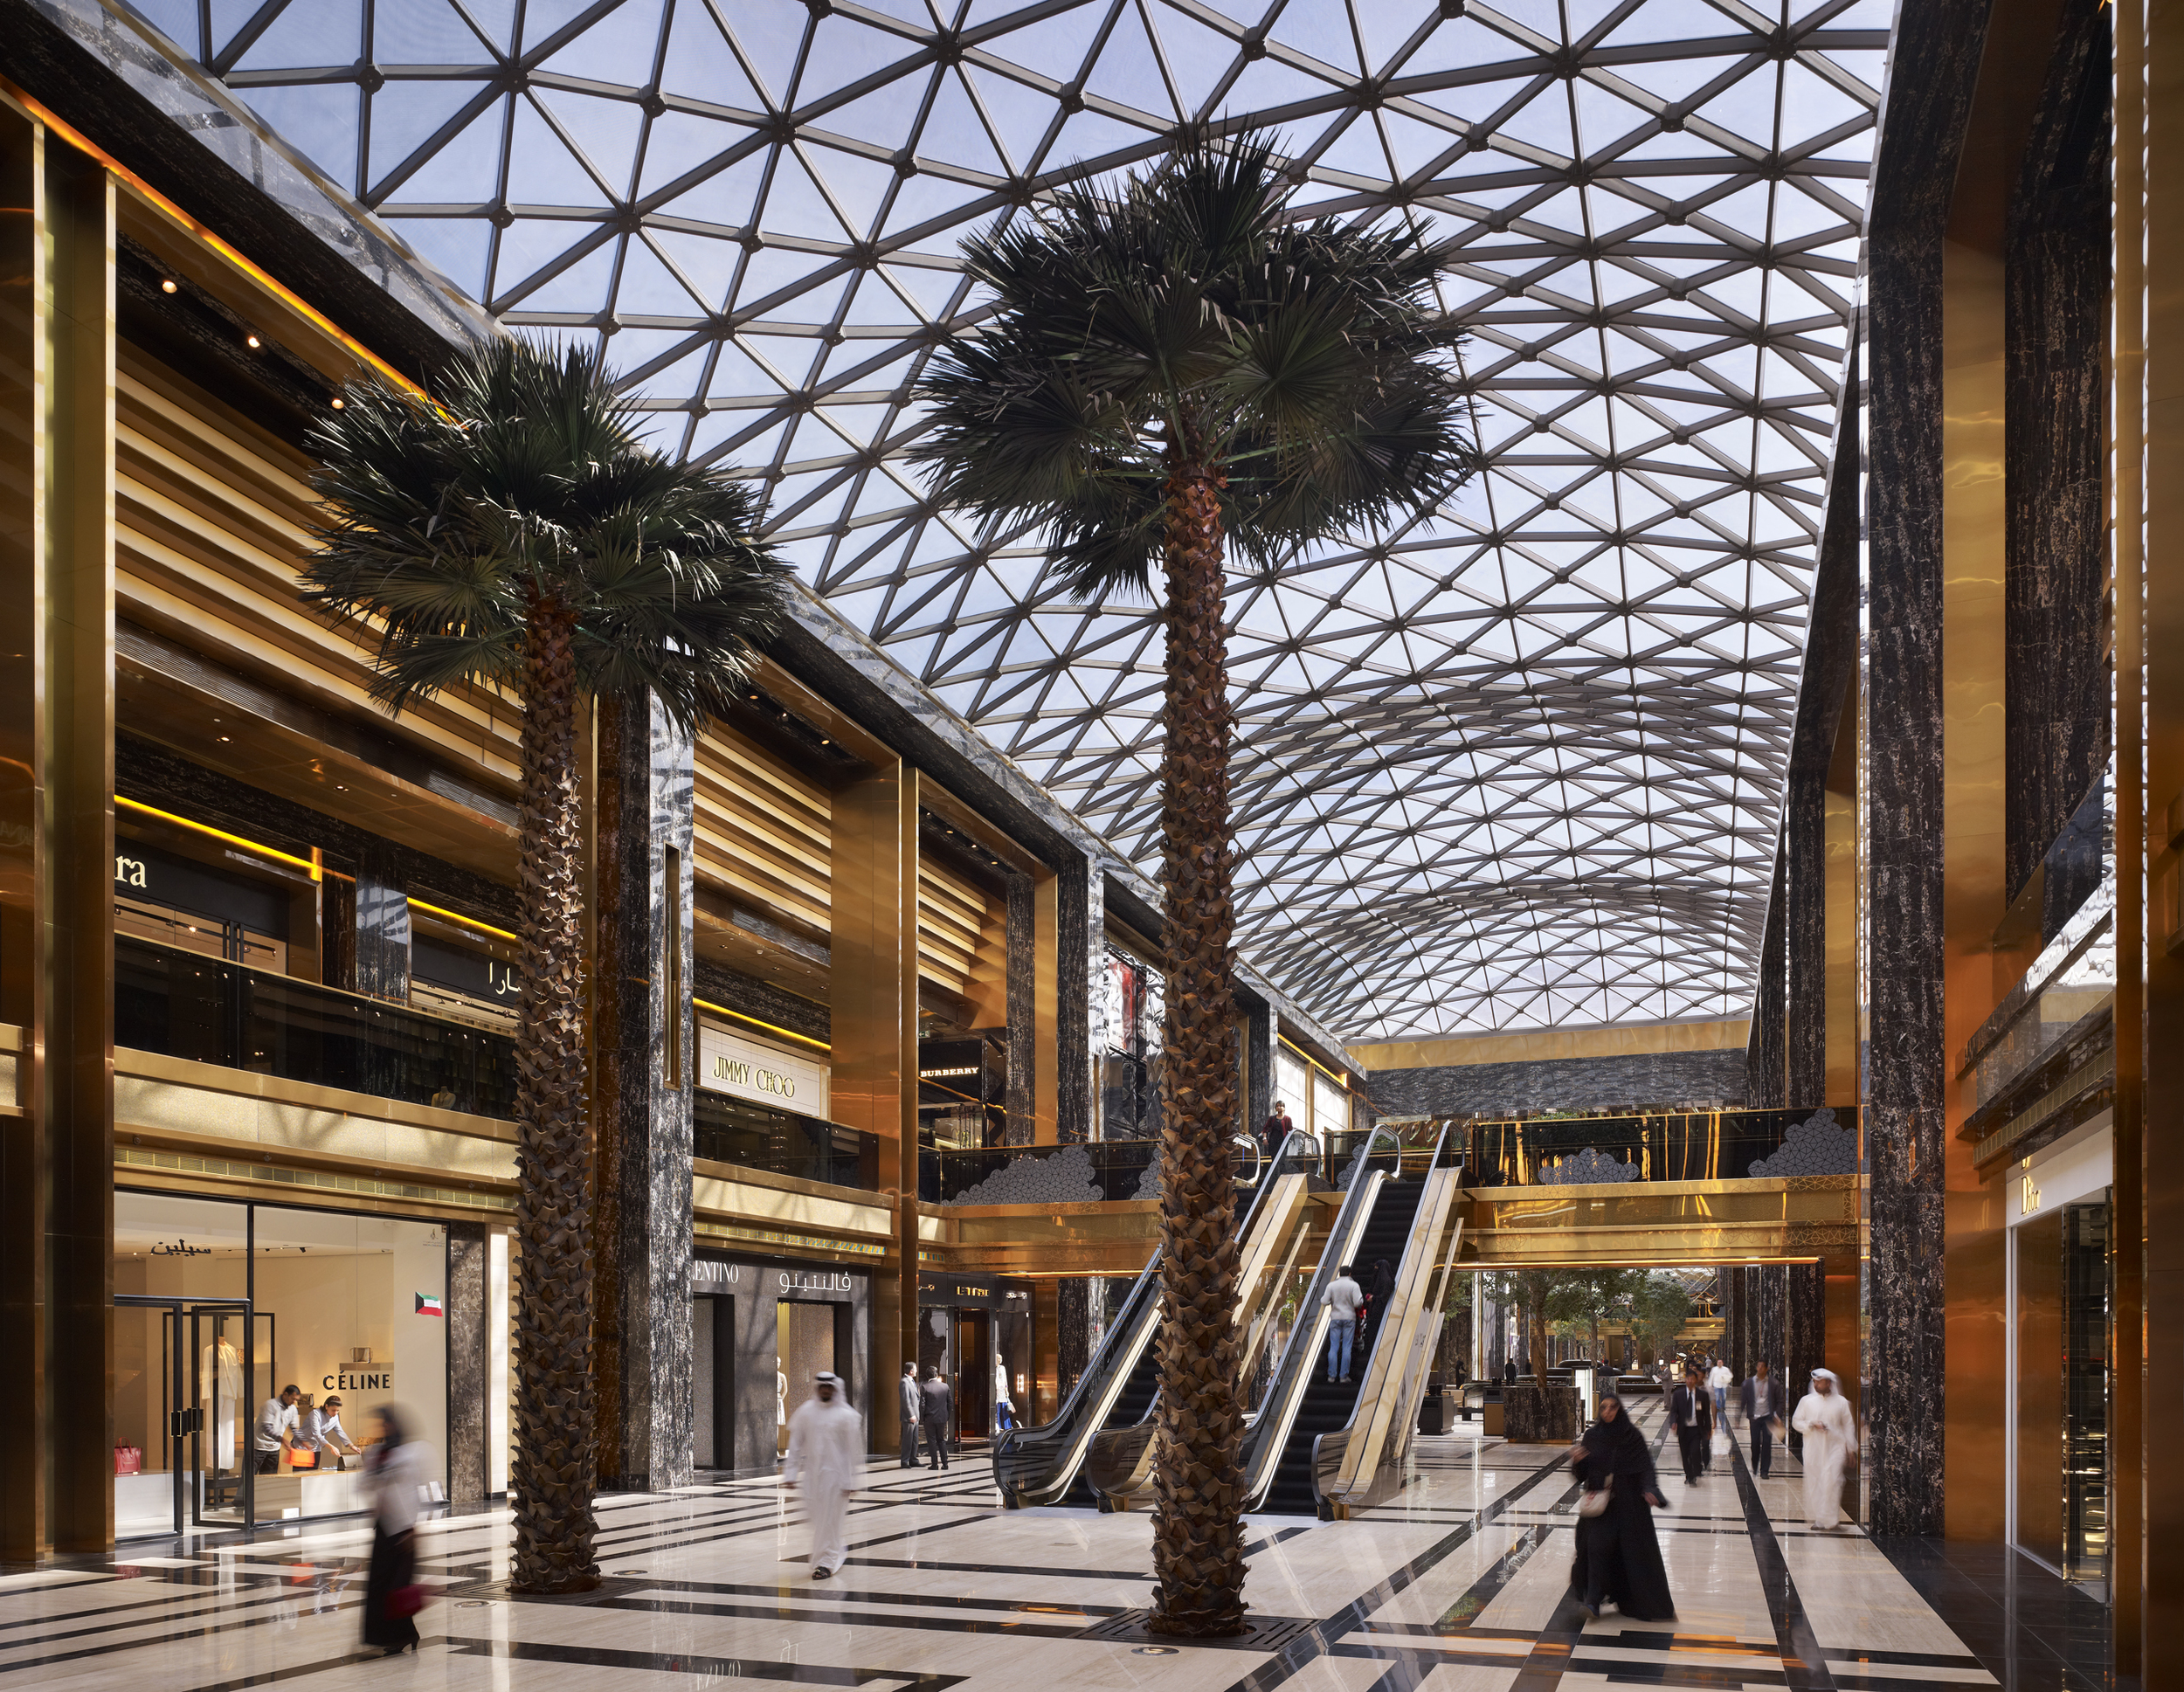  The Avenues: Phase III  PACE with Gensler  Kuwait City  &nbsp;   Return to Projects  